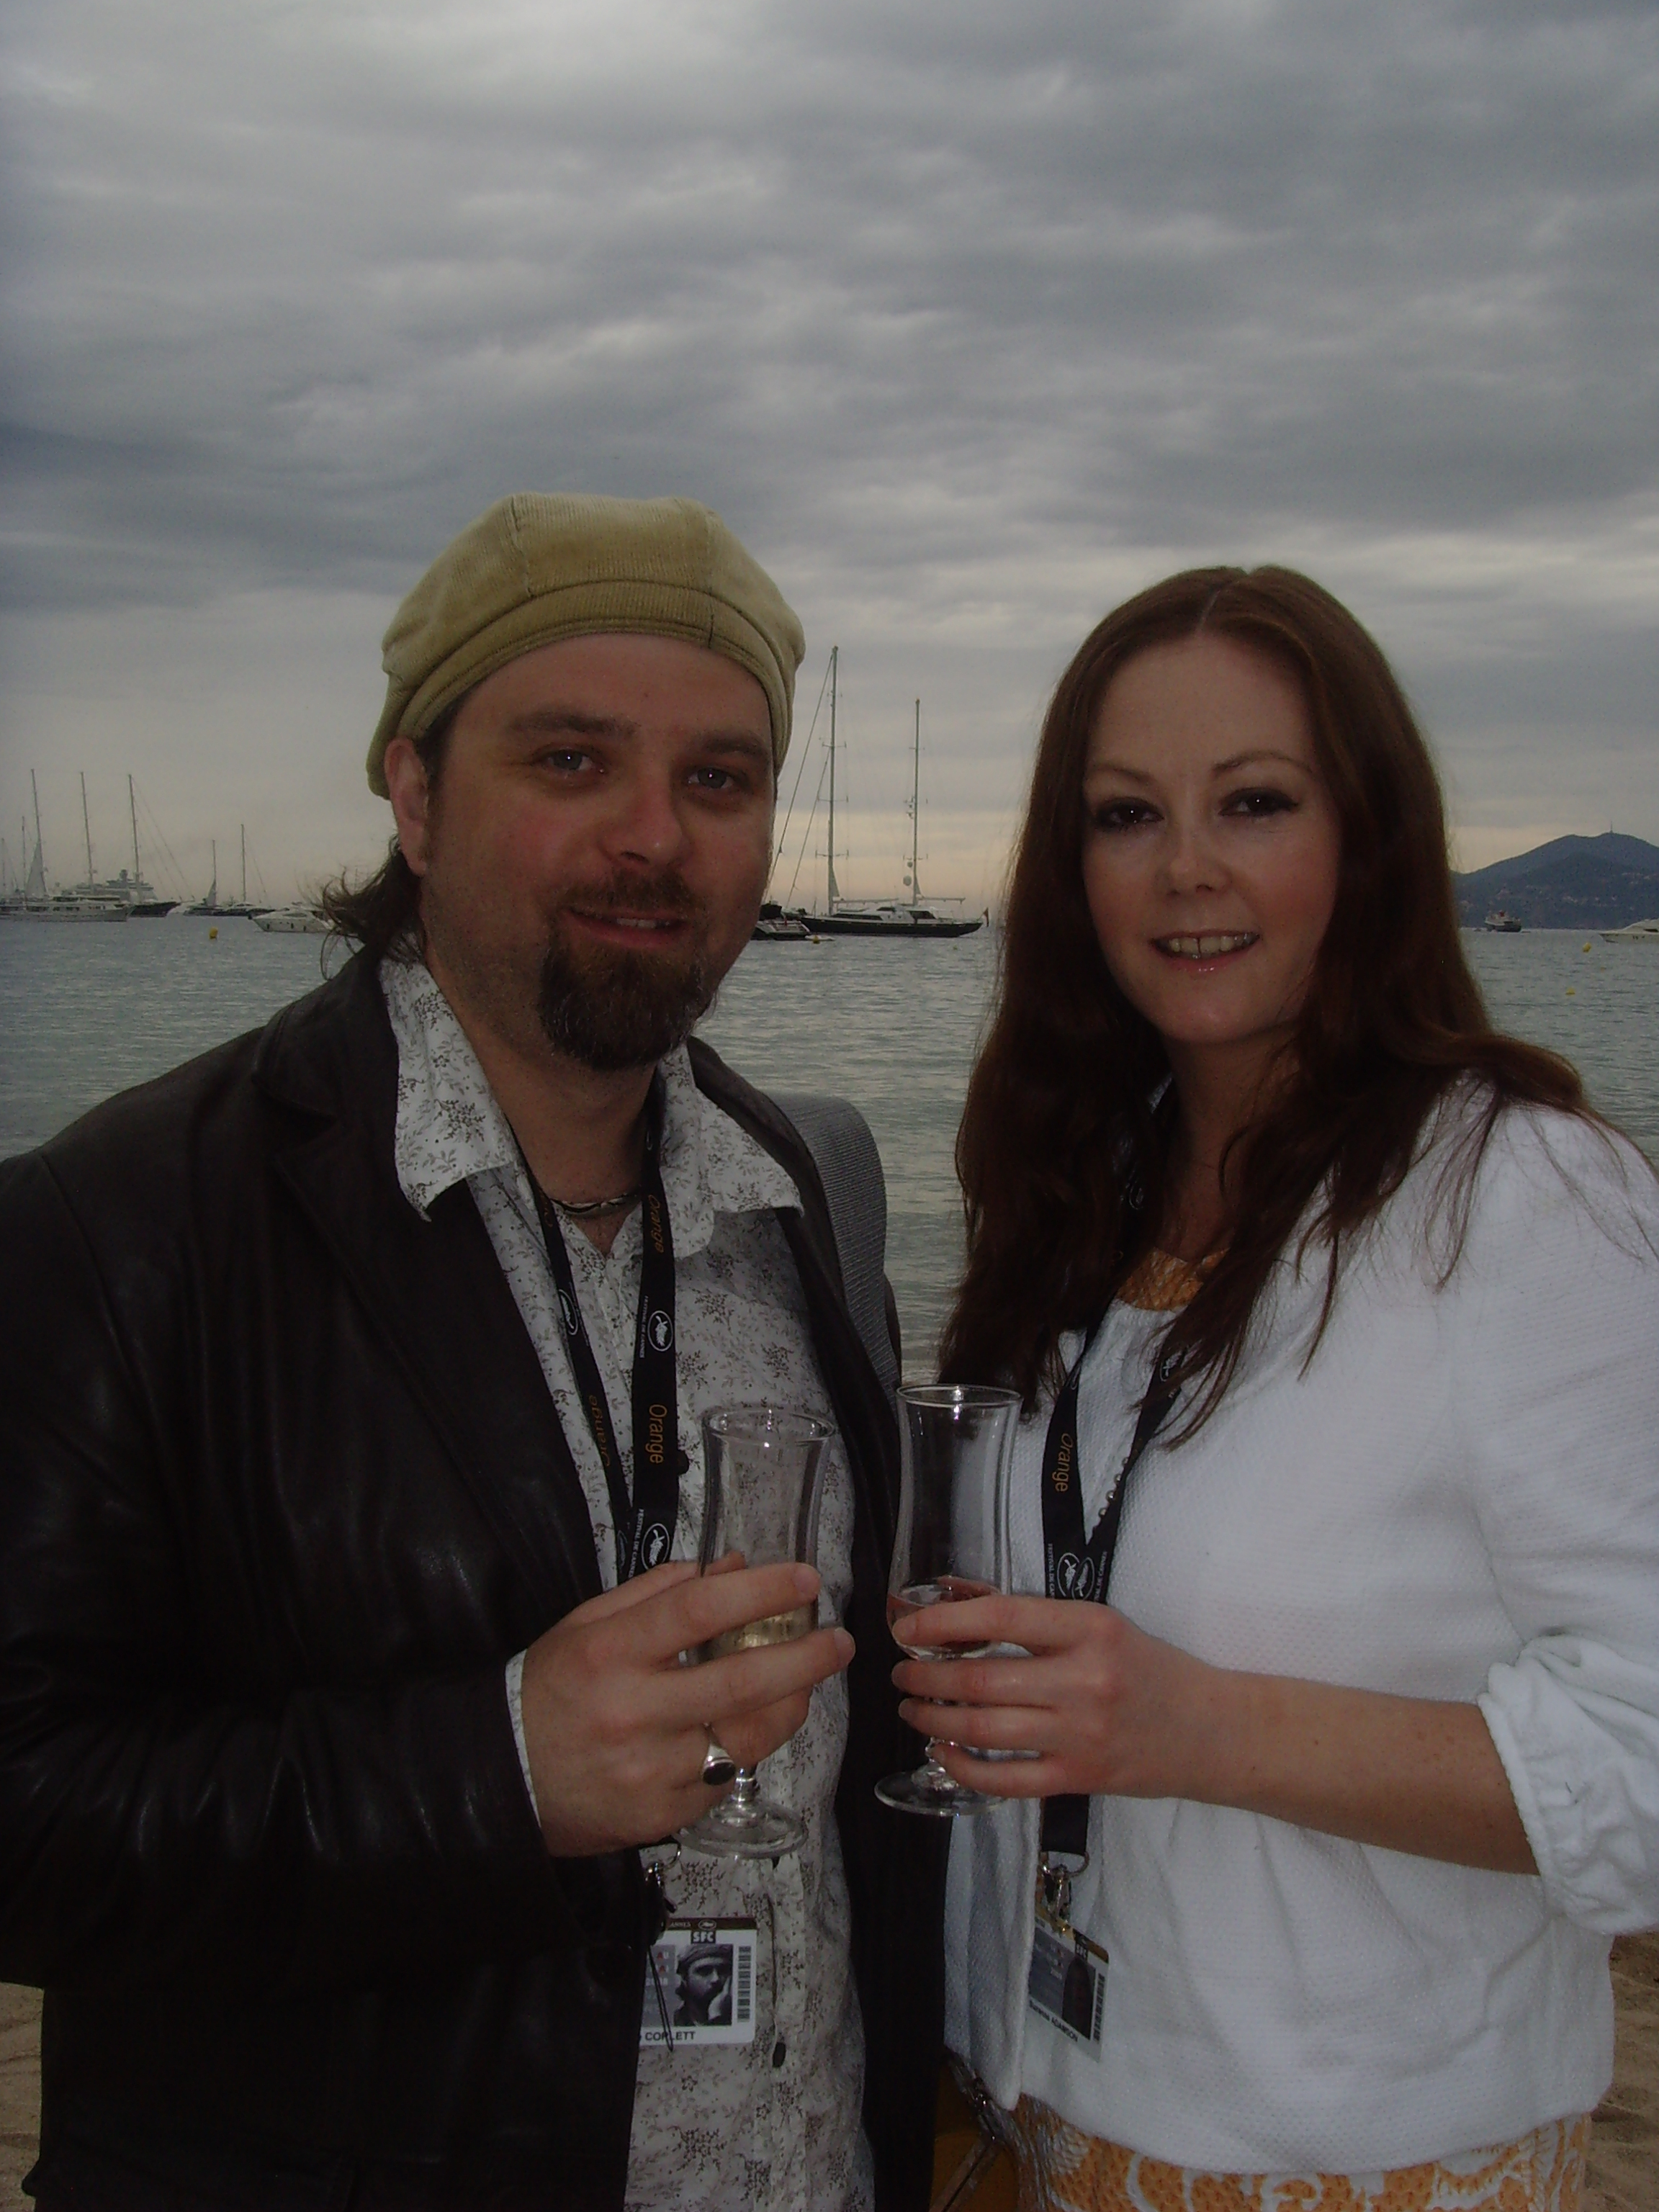 Director Dale Corlett and Actress Suzanne Adamson at the 61st Festival de Cannes